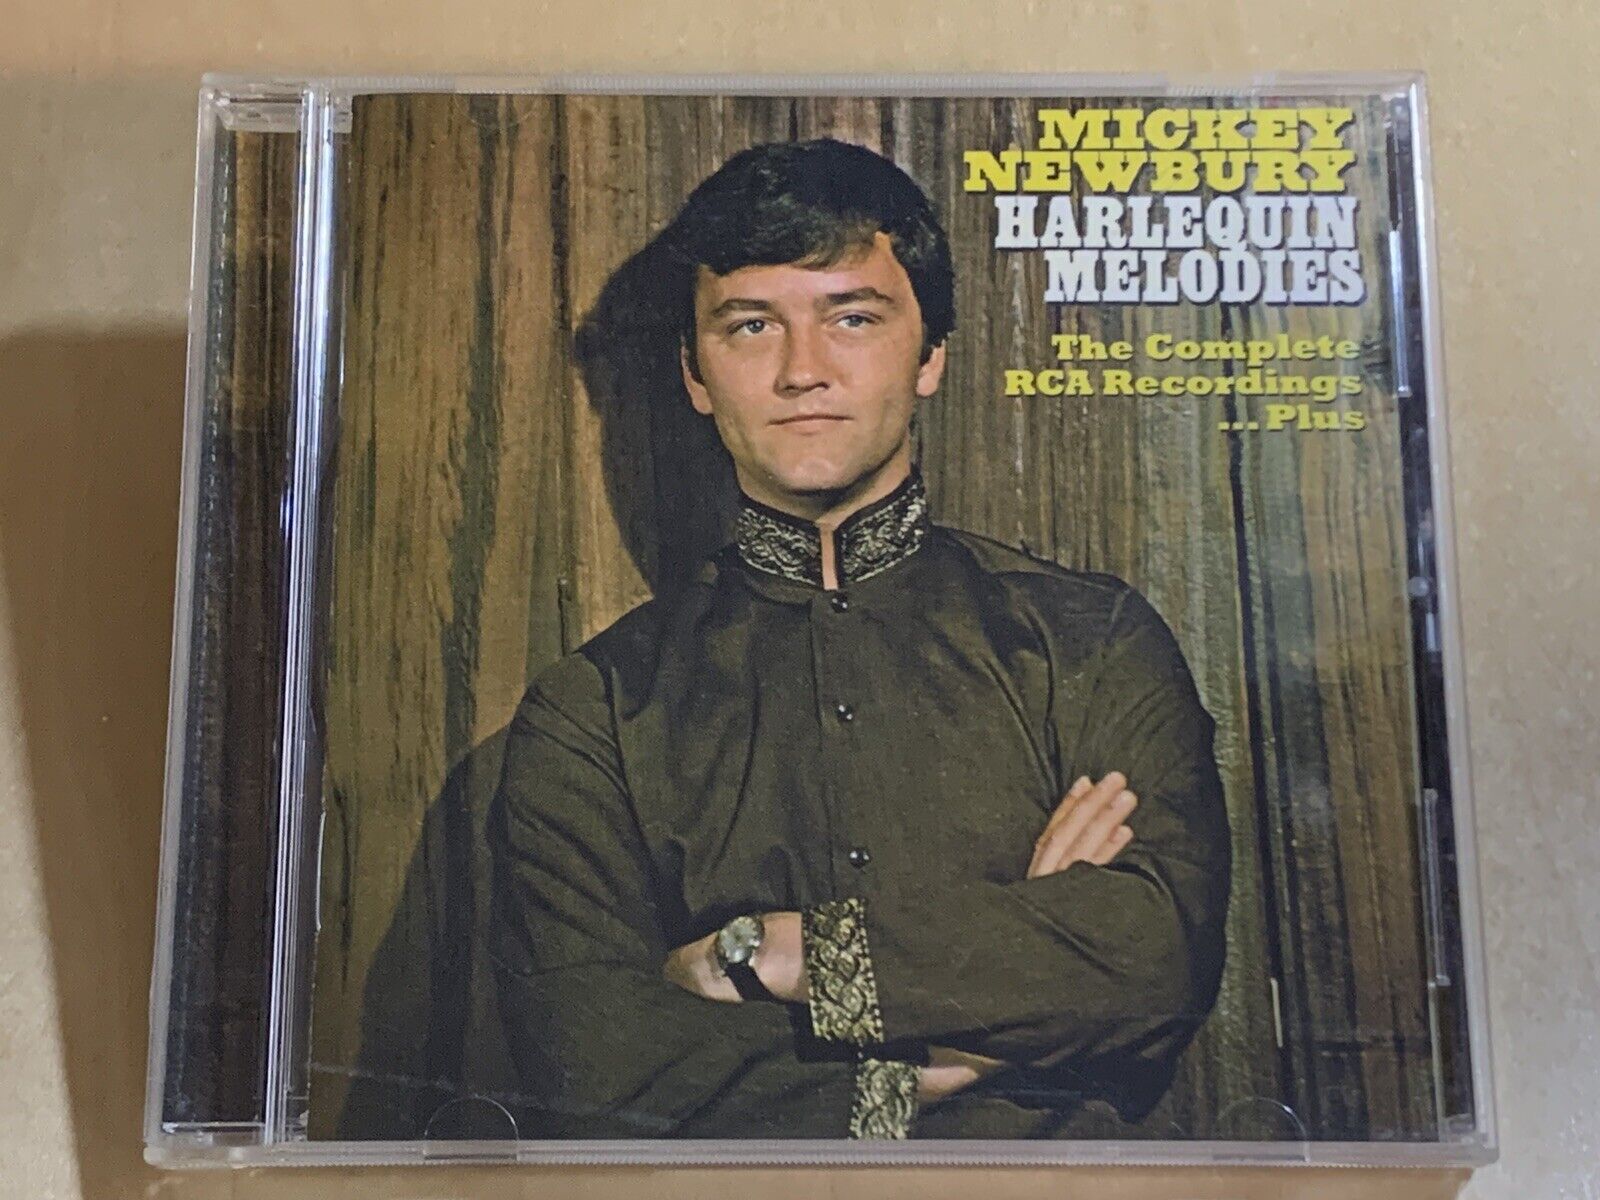 Mickey Newbury - Harlequin Melodies: The Complete RCA Recordings Plus CD Rare